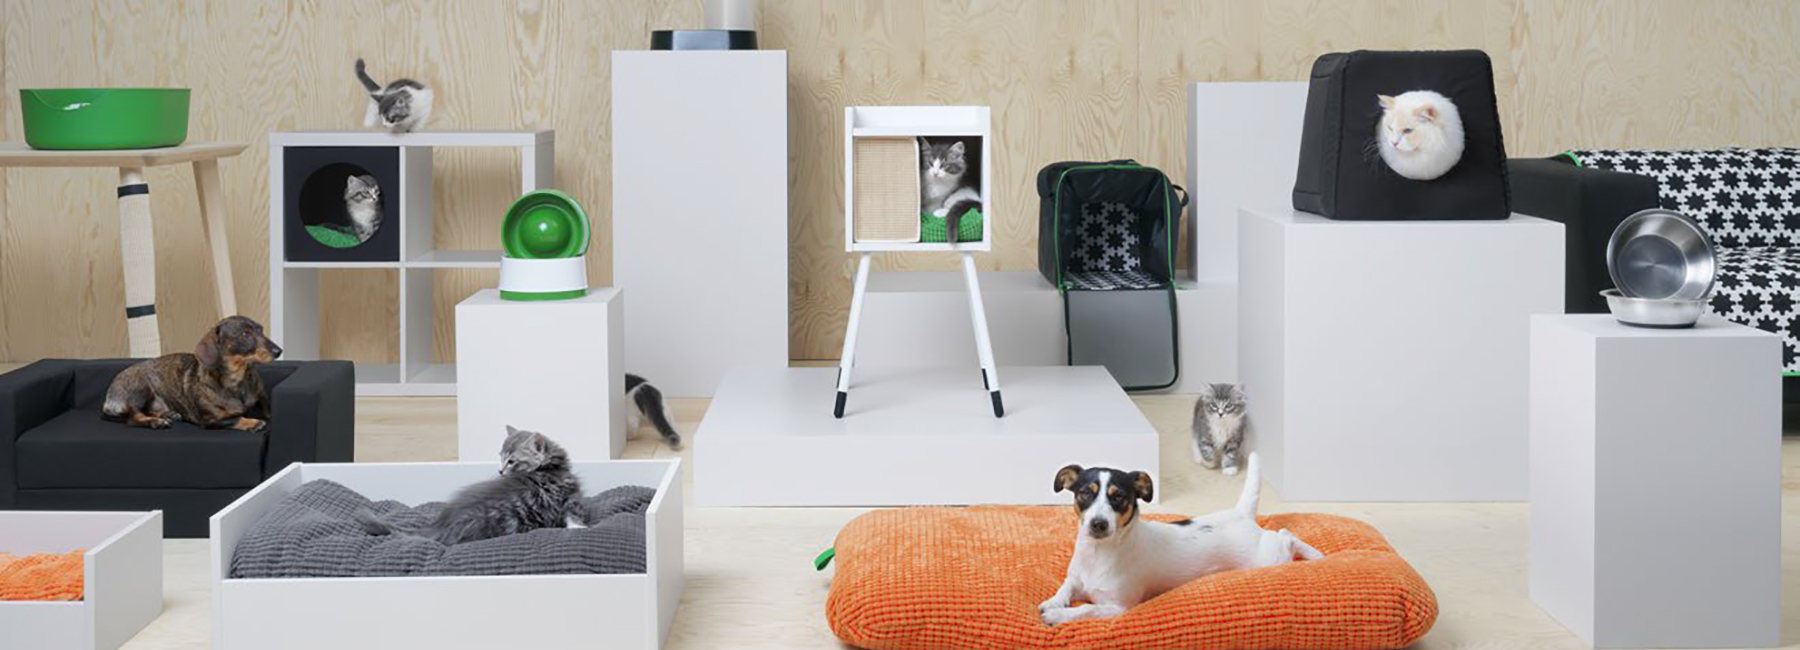 IKEA Introduces LURVIG A Collection Of Furniture And